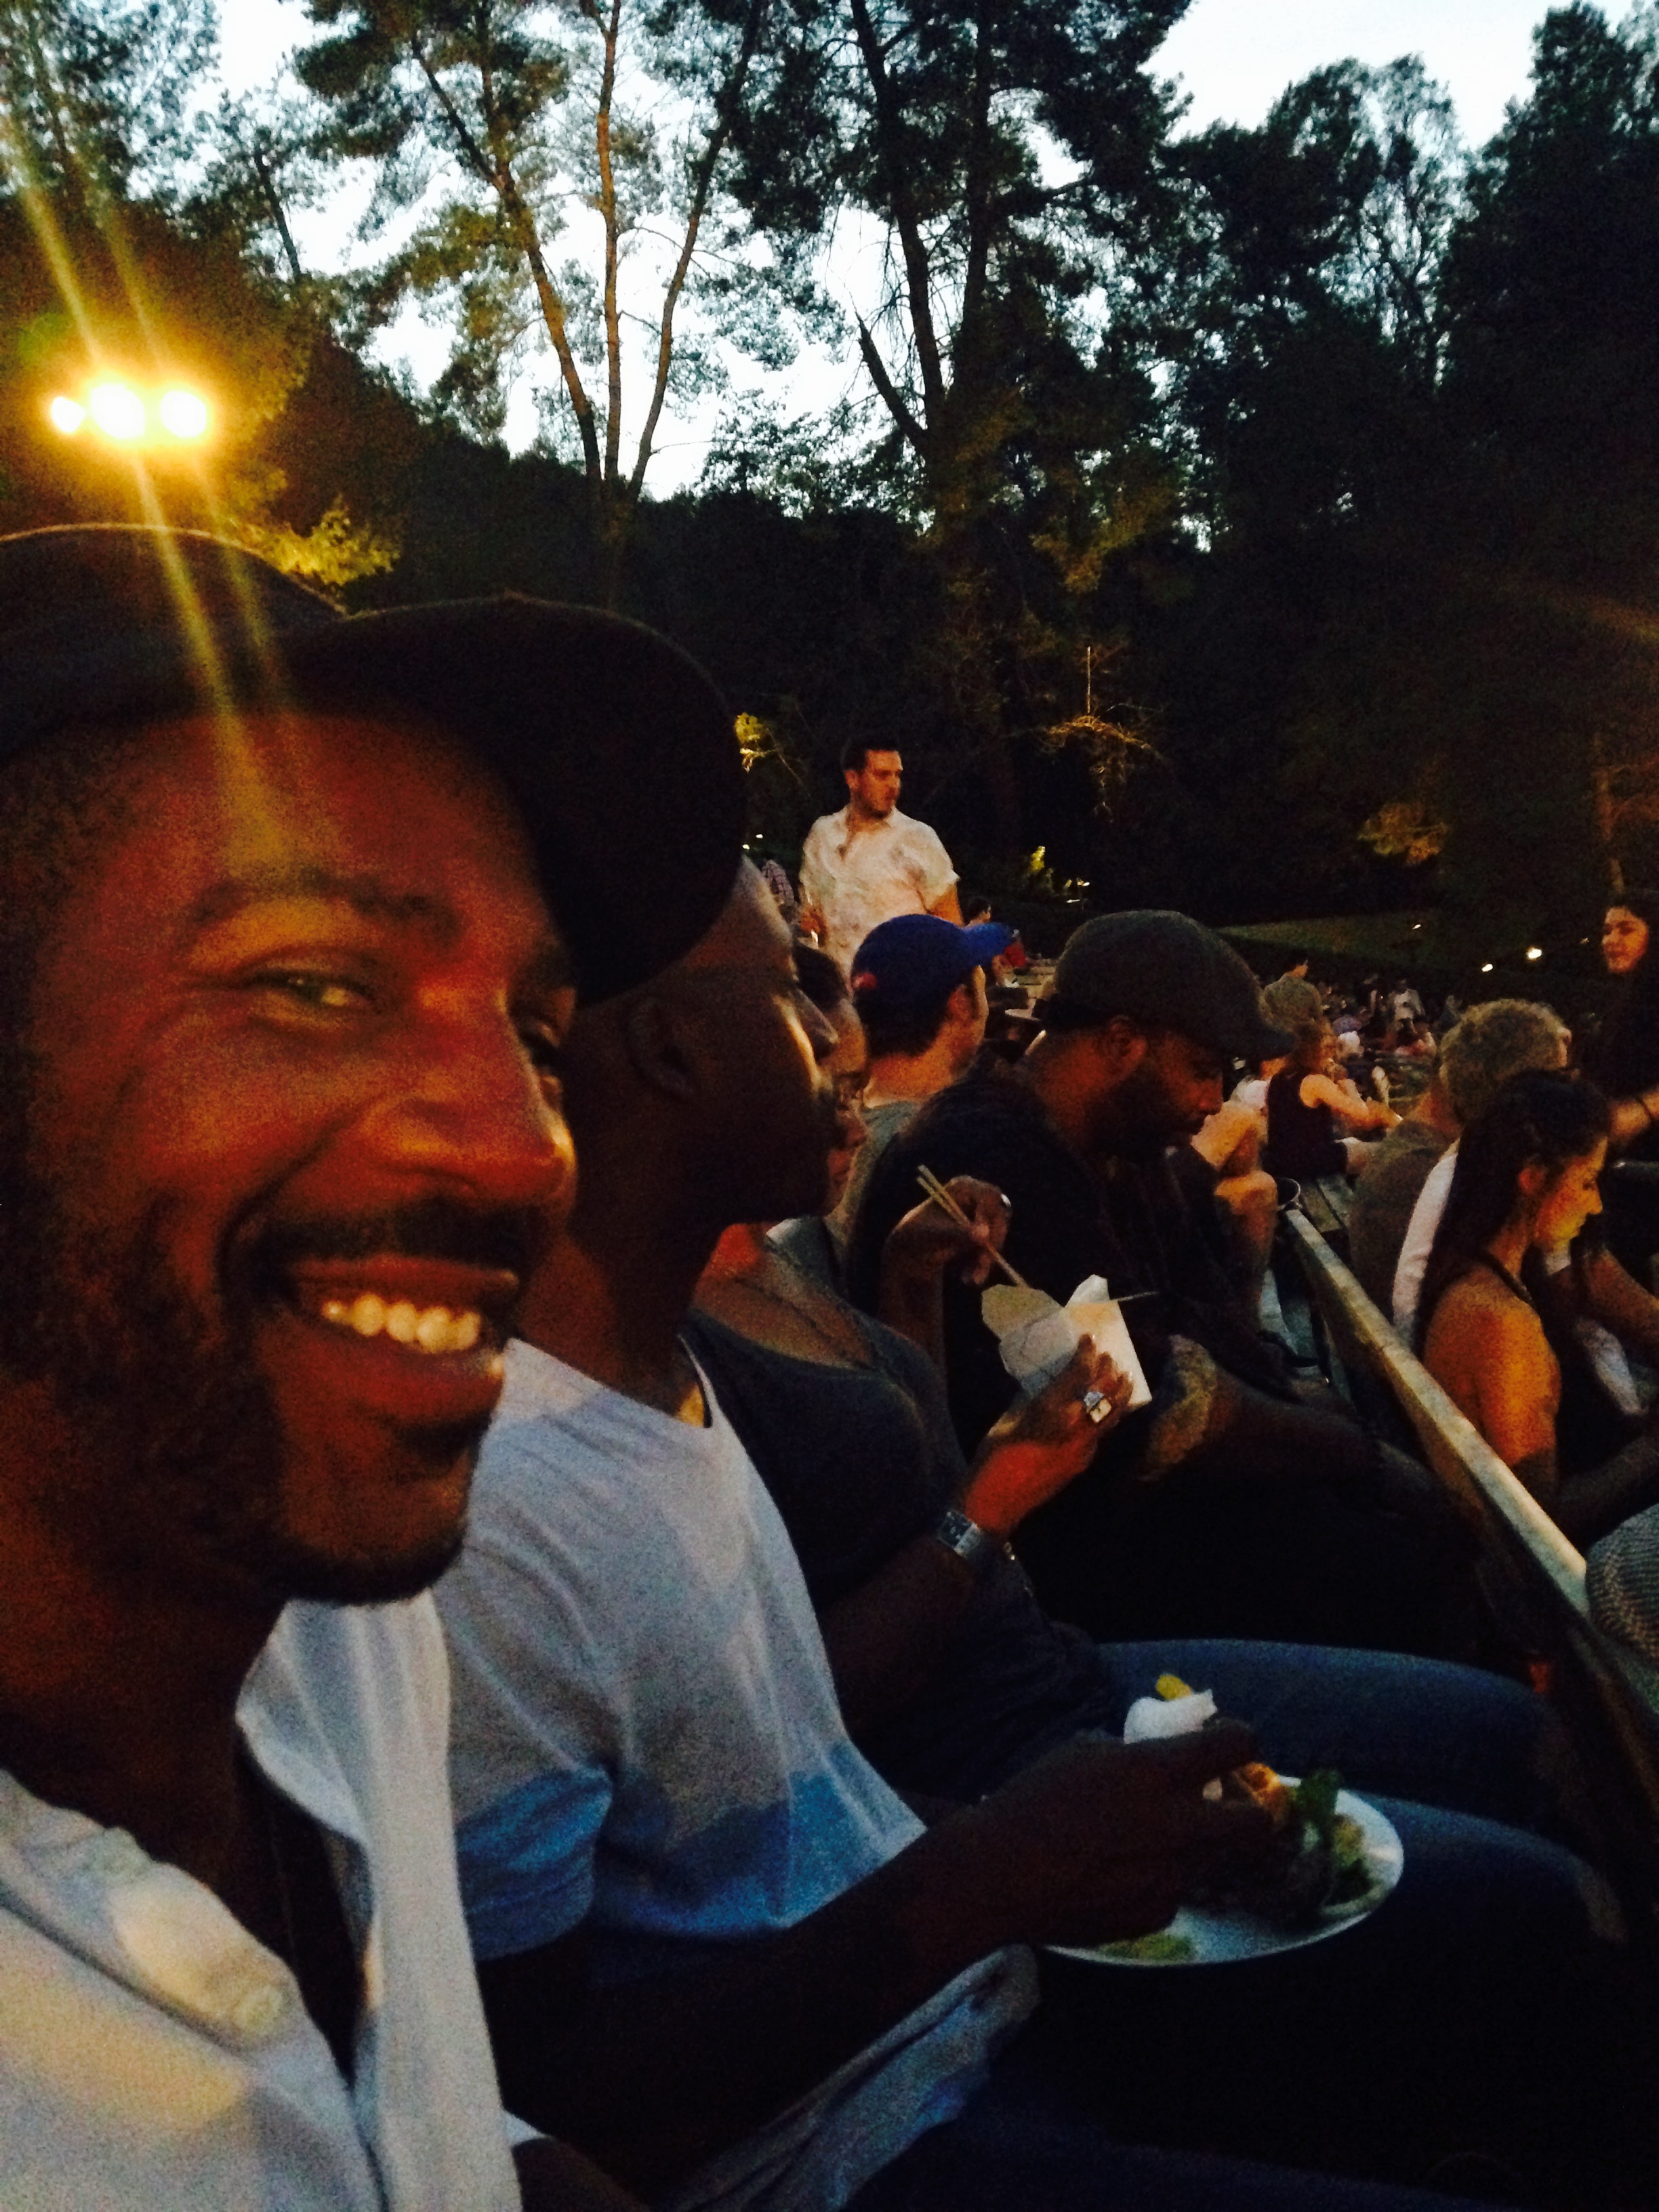 Hollywood Bowl and Grace Jones!!! Lots of fun and good friends...